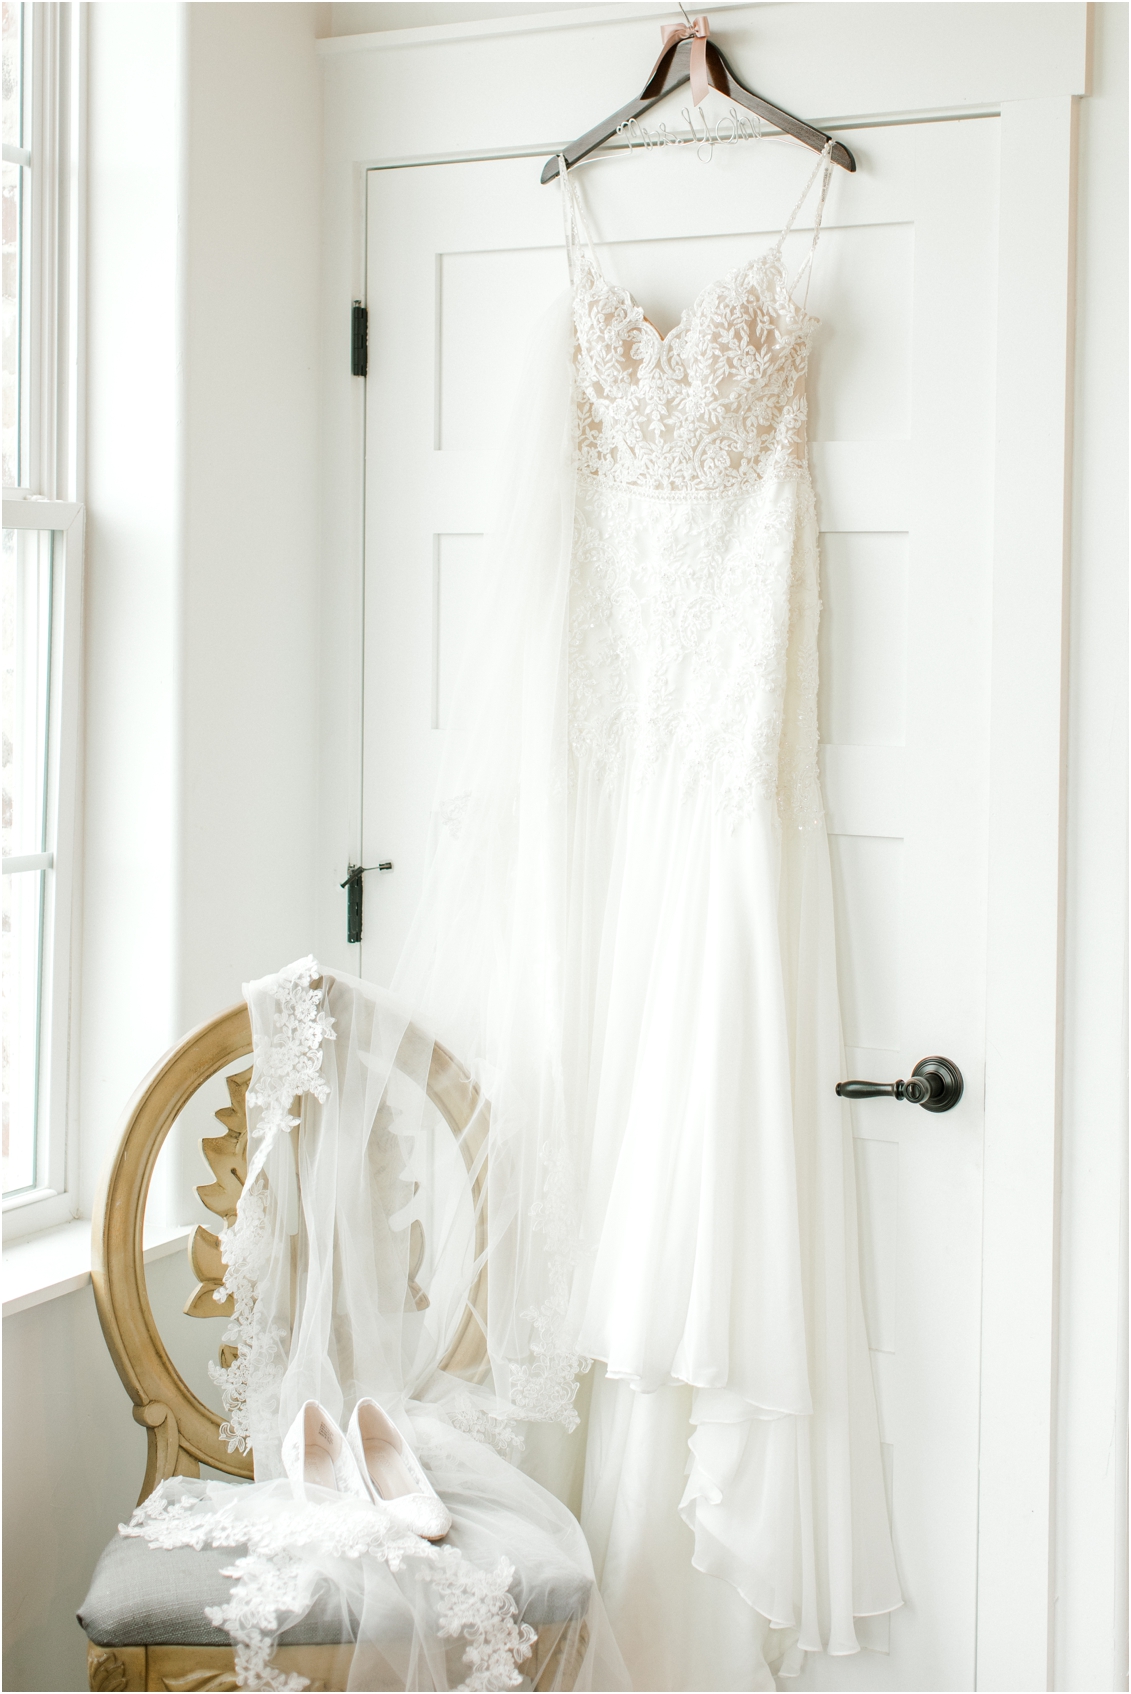 Wedding at Rustic Grace Estate by Gaby Caskey Photography, wedding dress hanging picture